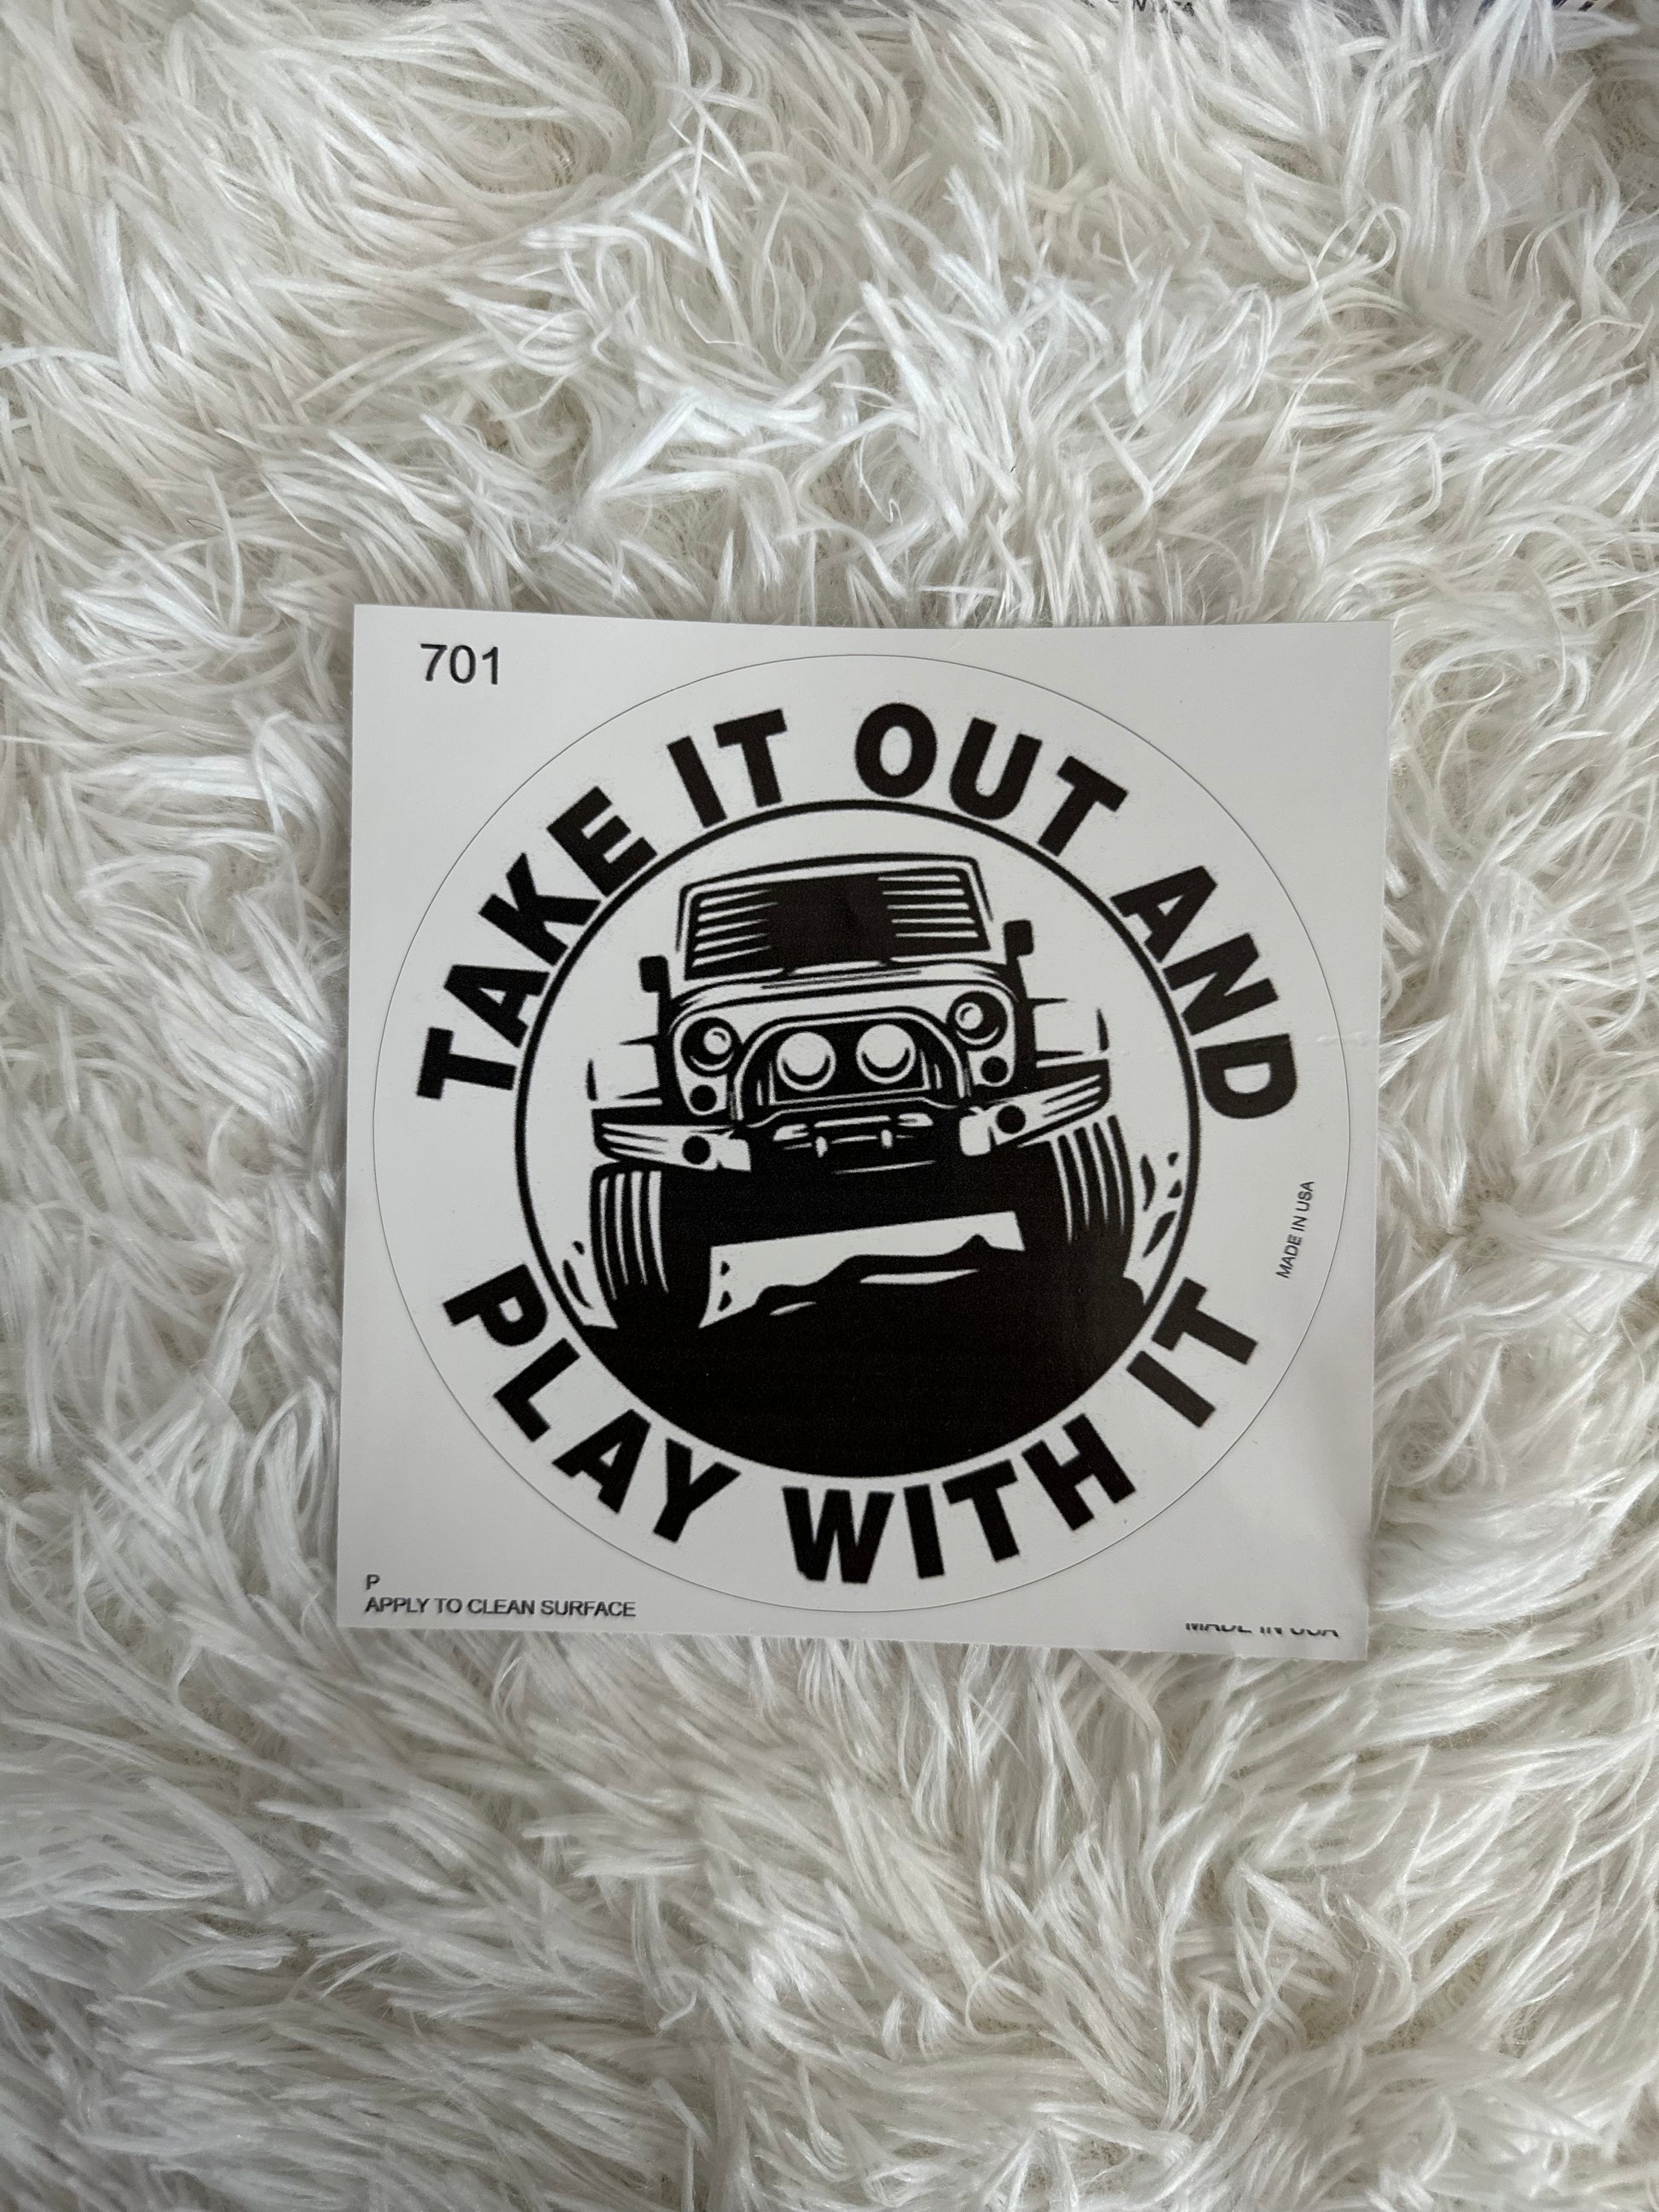 TAKE IT OUT AND PLAY WITH IT DYE CUT BUMPER/ WINDOW STICKER - Crazy Kat Design Co